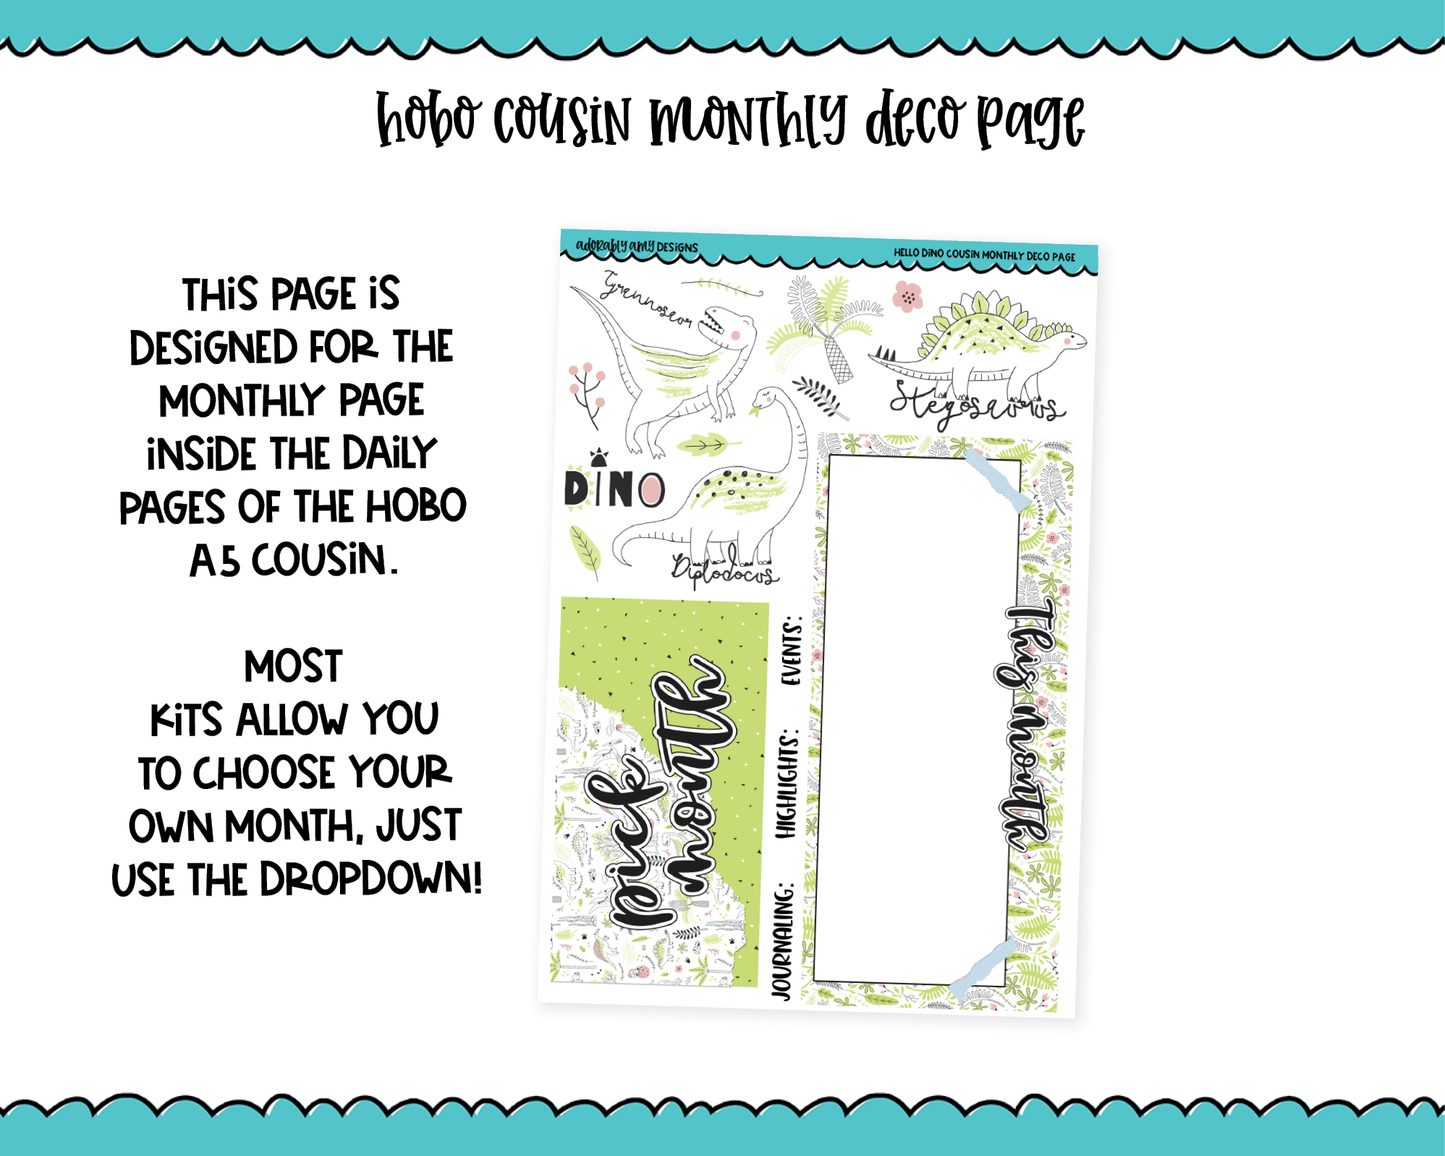 Hobonichi Cousin Monthly Pick Your Month Hello Dino Themed Planner Sticker Kit for Hobo Cousin or Similar Planners